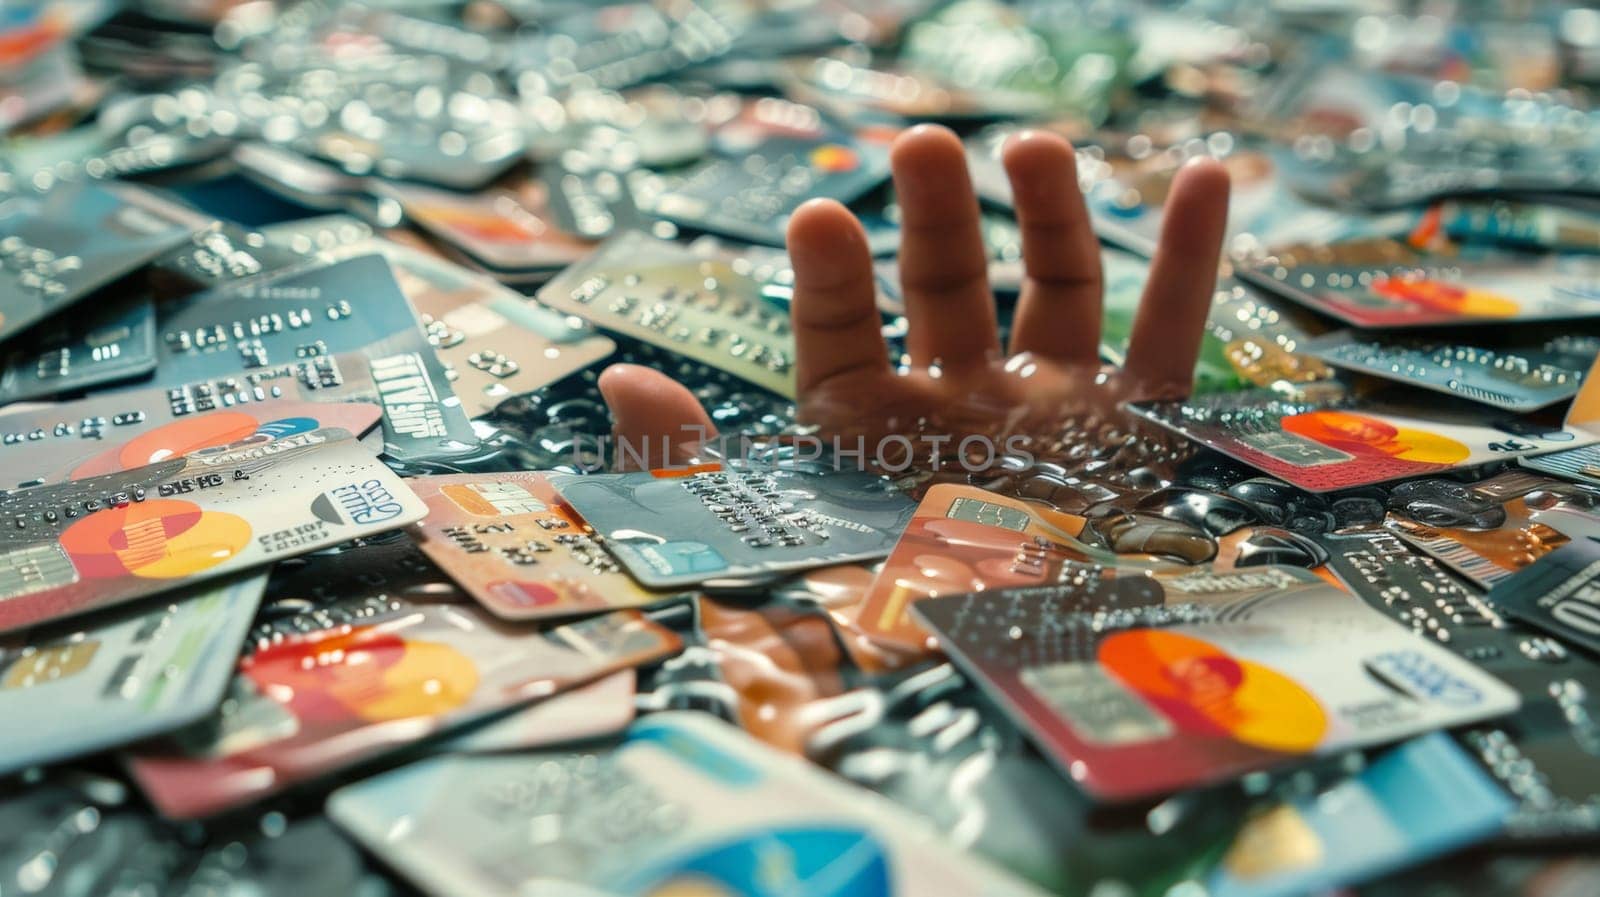 Credit bureau, a sea of credit cards, a hand is trying to reach out under the pile of credit cards.